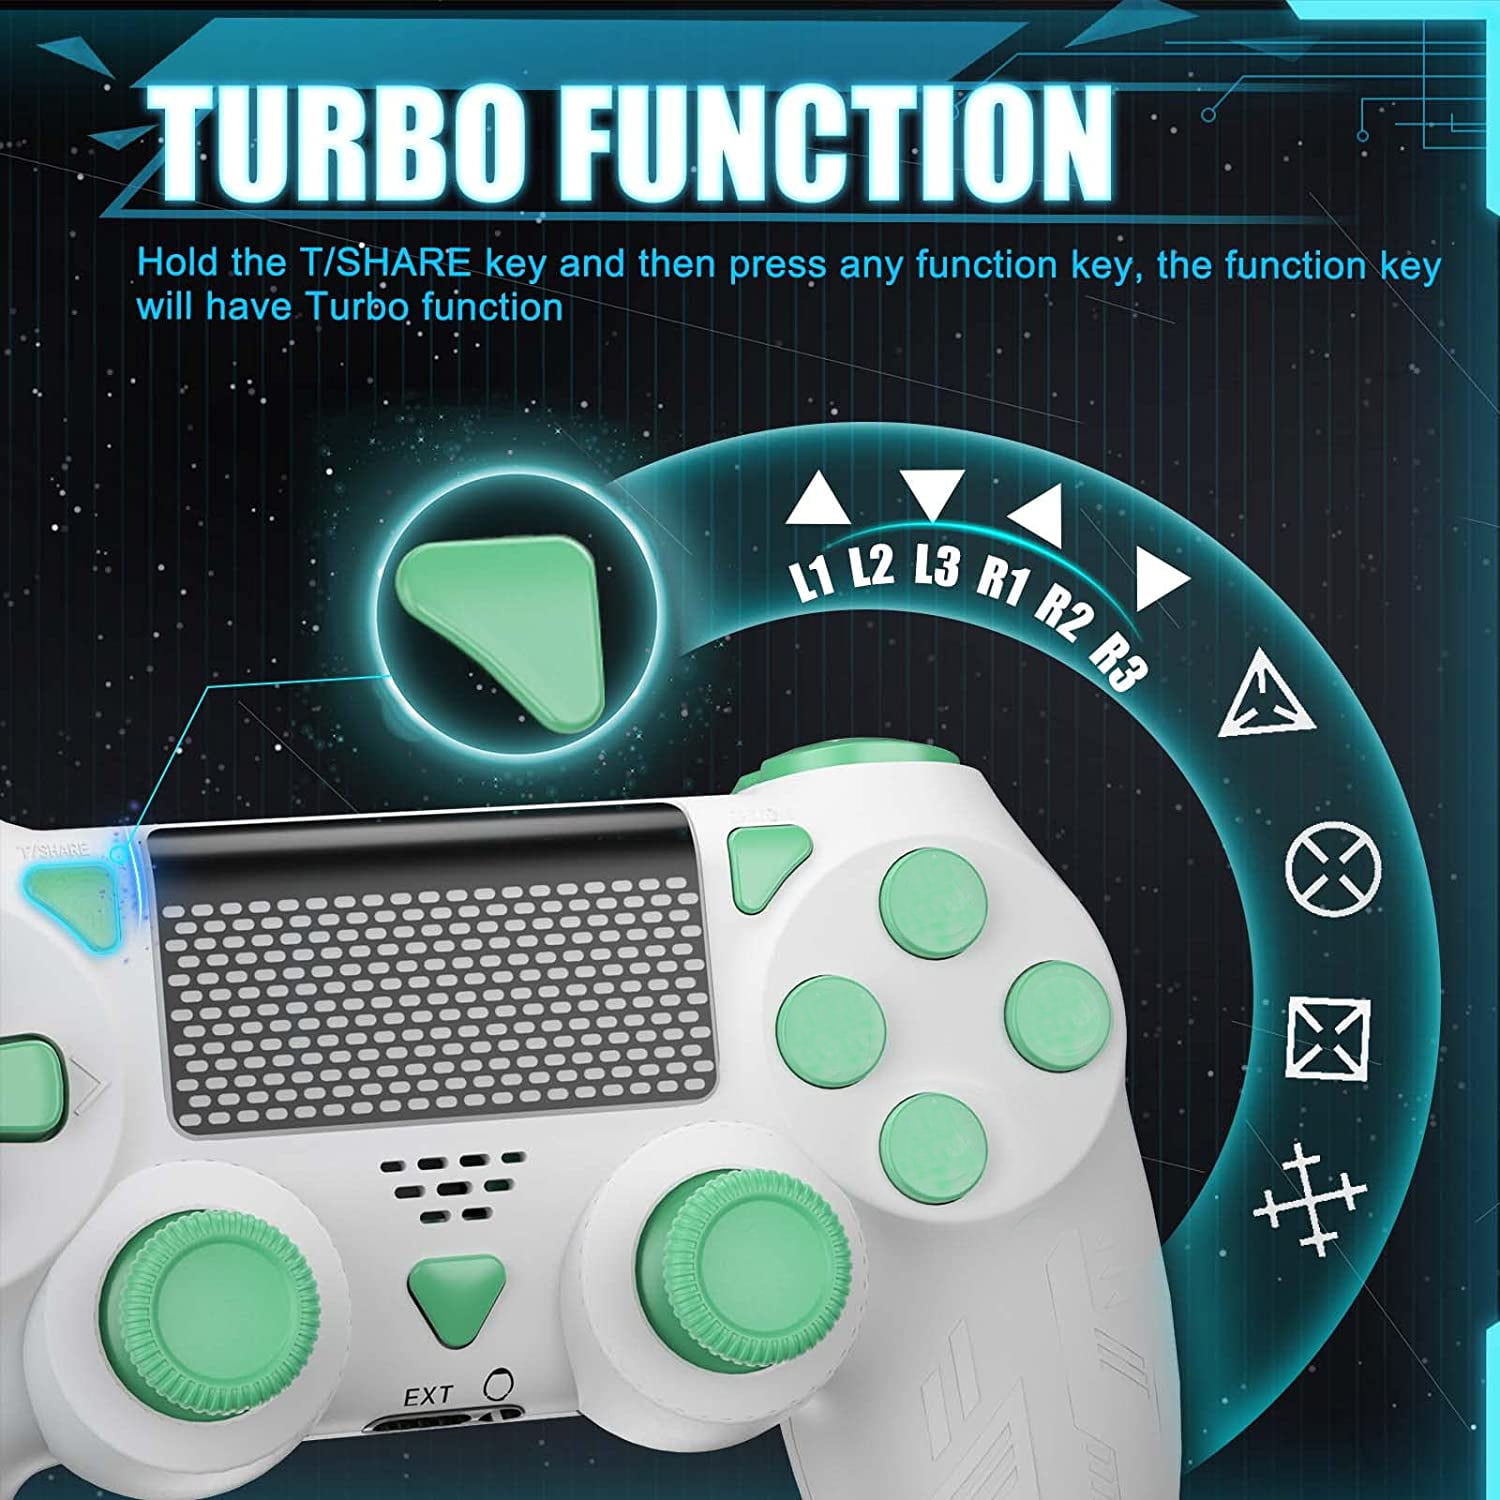 2 Wireless Controller for PS4, Bonadget Wireless Gamepad with Playstation 4/ Pro/Slim,PS-4 Remote Built-in 1000mAh Battery with Turbo/ Dual Motion Sensor - Walmart.com